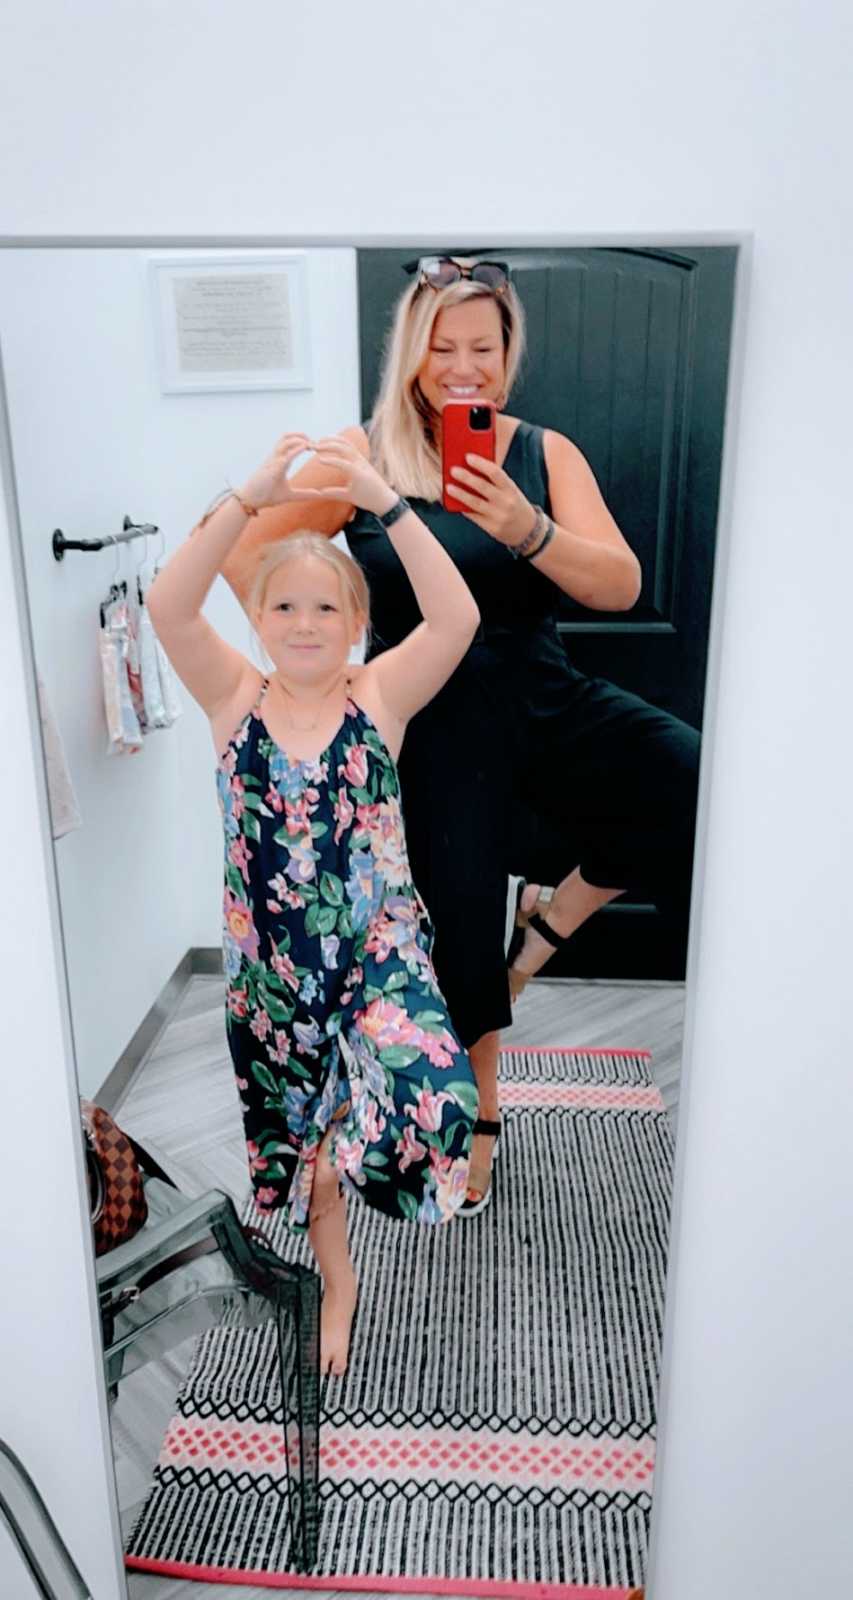 A woman takes a photo of herself and her daughter in a mirror